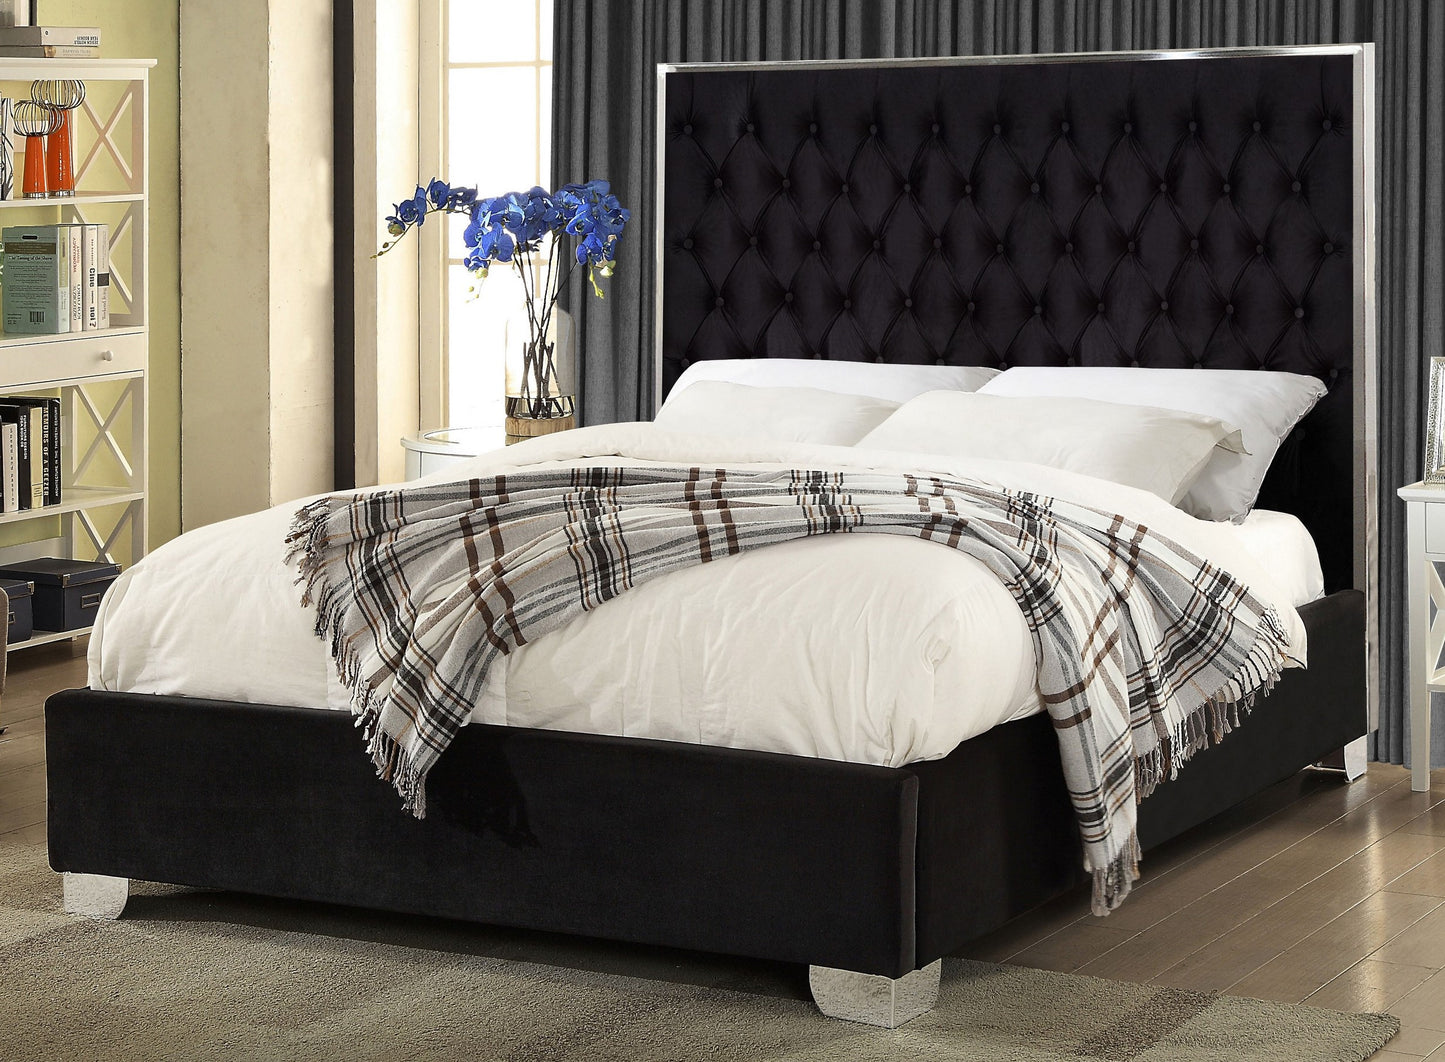 KING SIZE- (5542 BLACK)- VELVET FABRIC BED FRAME- WITH SLATS- OUT OF STOCK UNTIL JULY 15, 2023